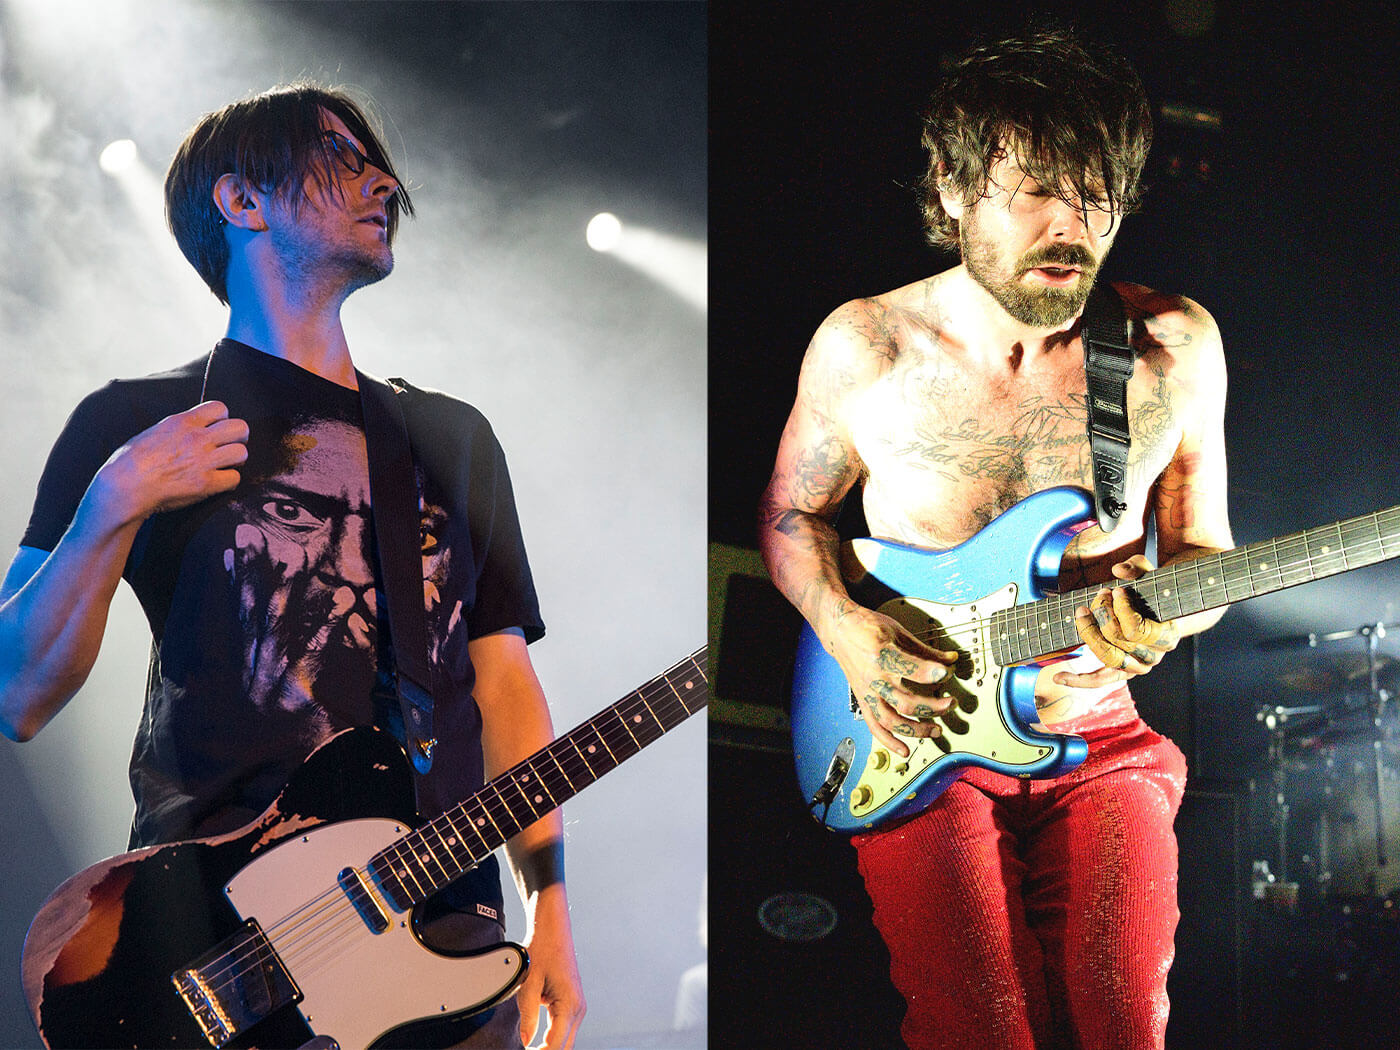 Steven Wilson teases a collaboration with Biffy Clyro  | All  Things Guitar